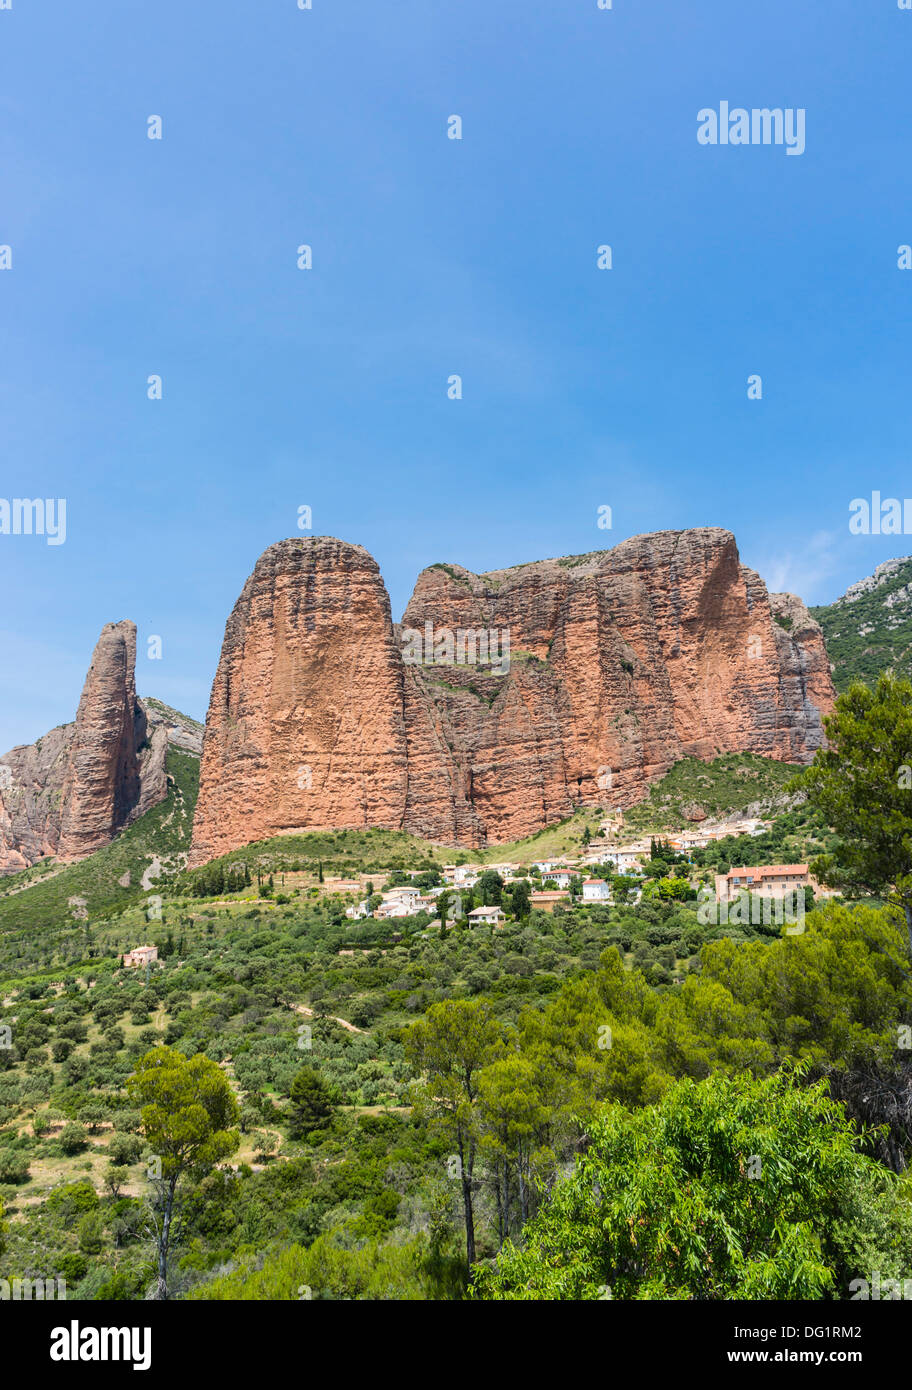 North-West Spain - Riglos, near Huesca. The village nestles below the huge sandstone butte called the Mallos de Riglos. Stock Photo